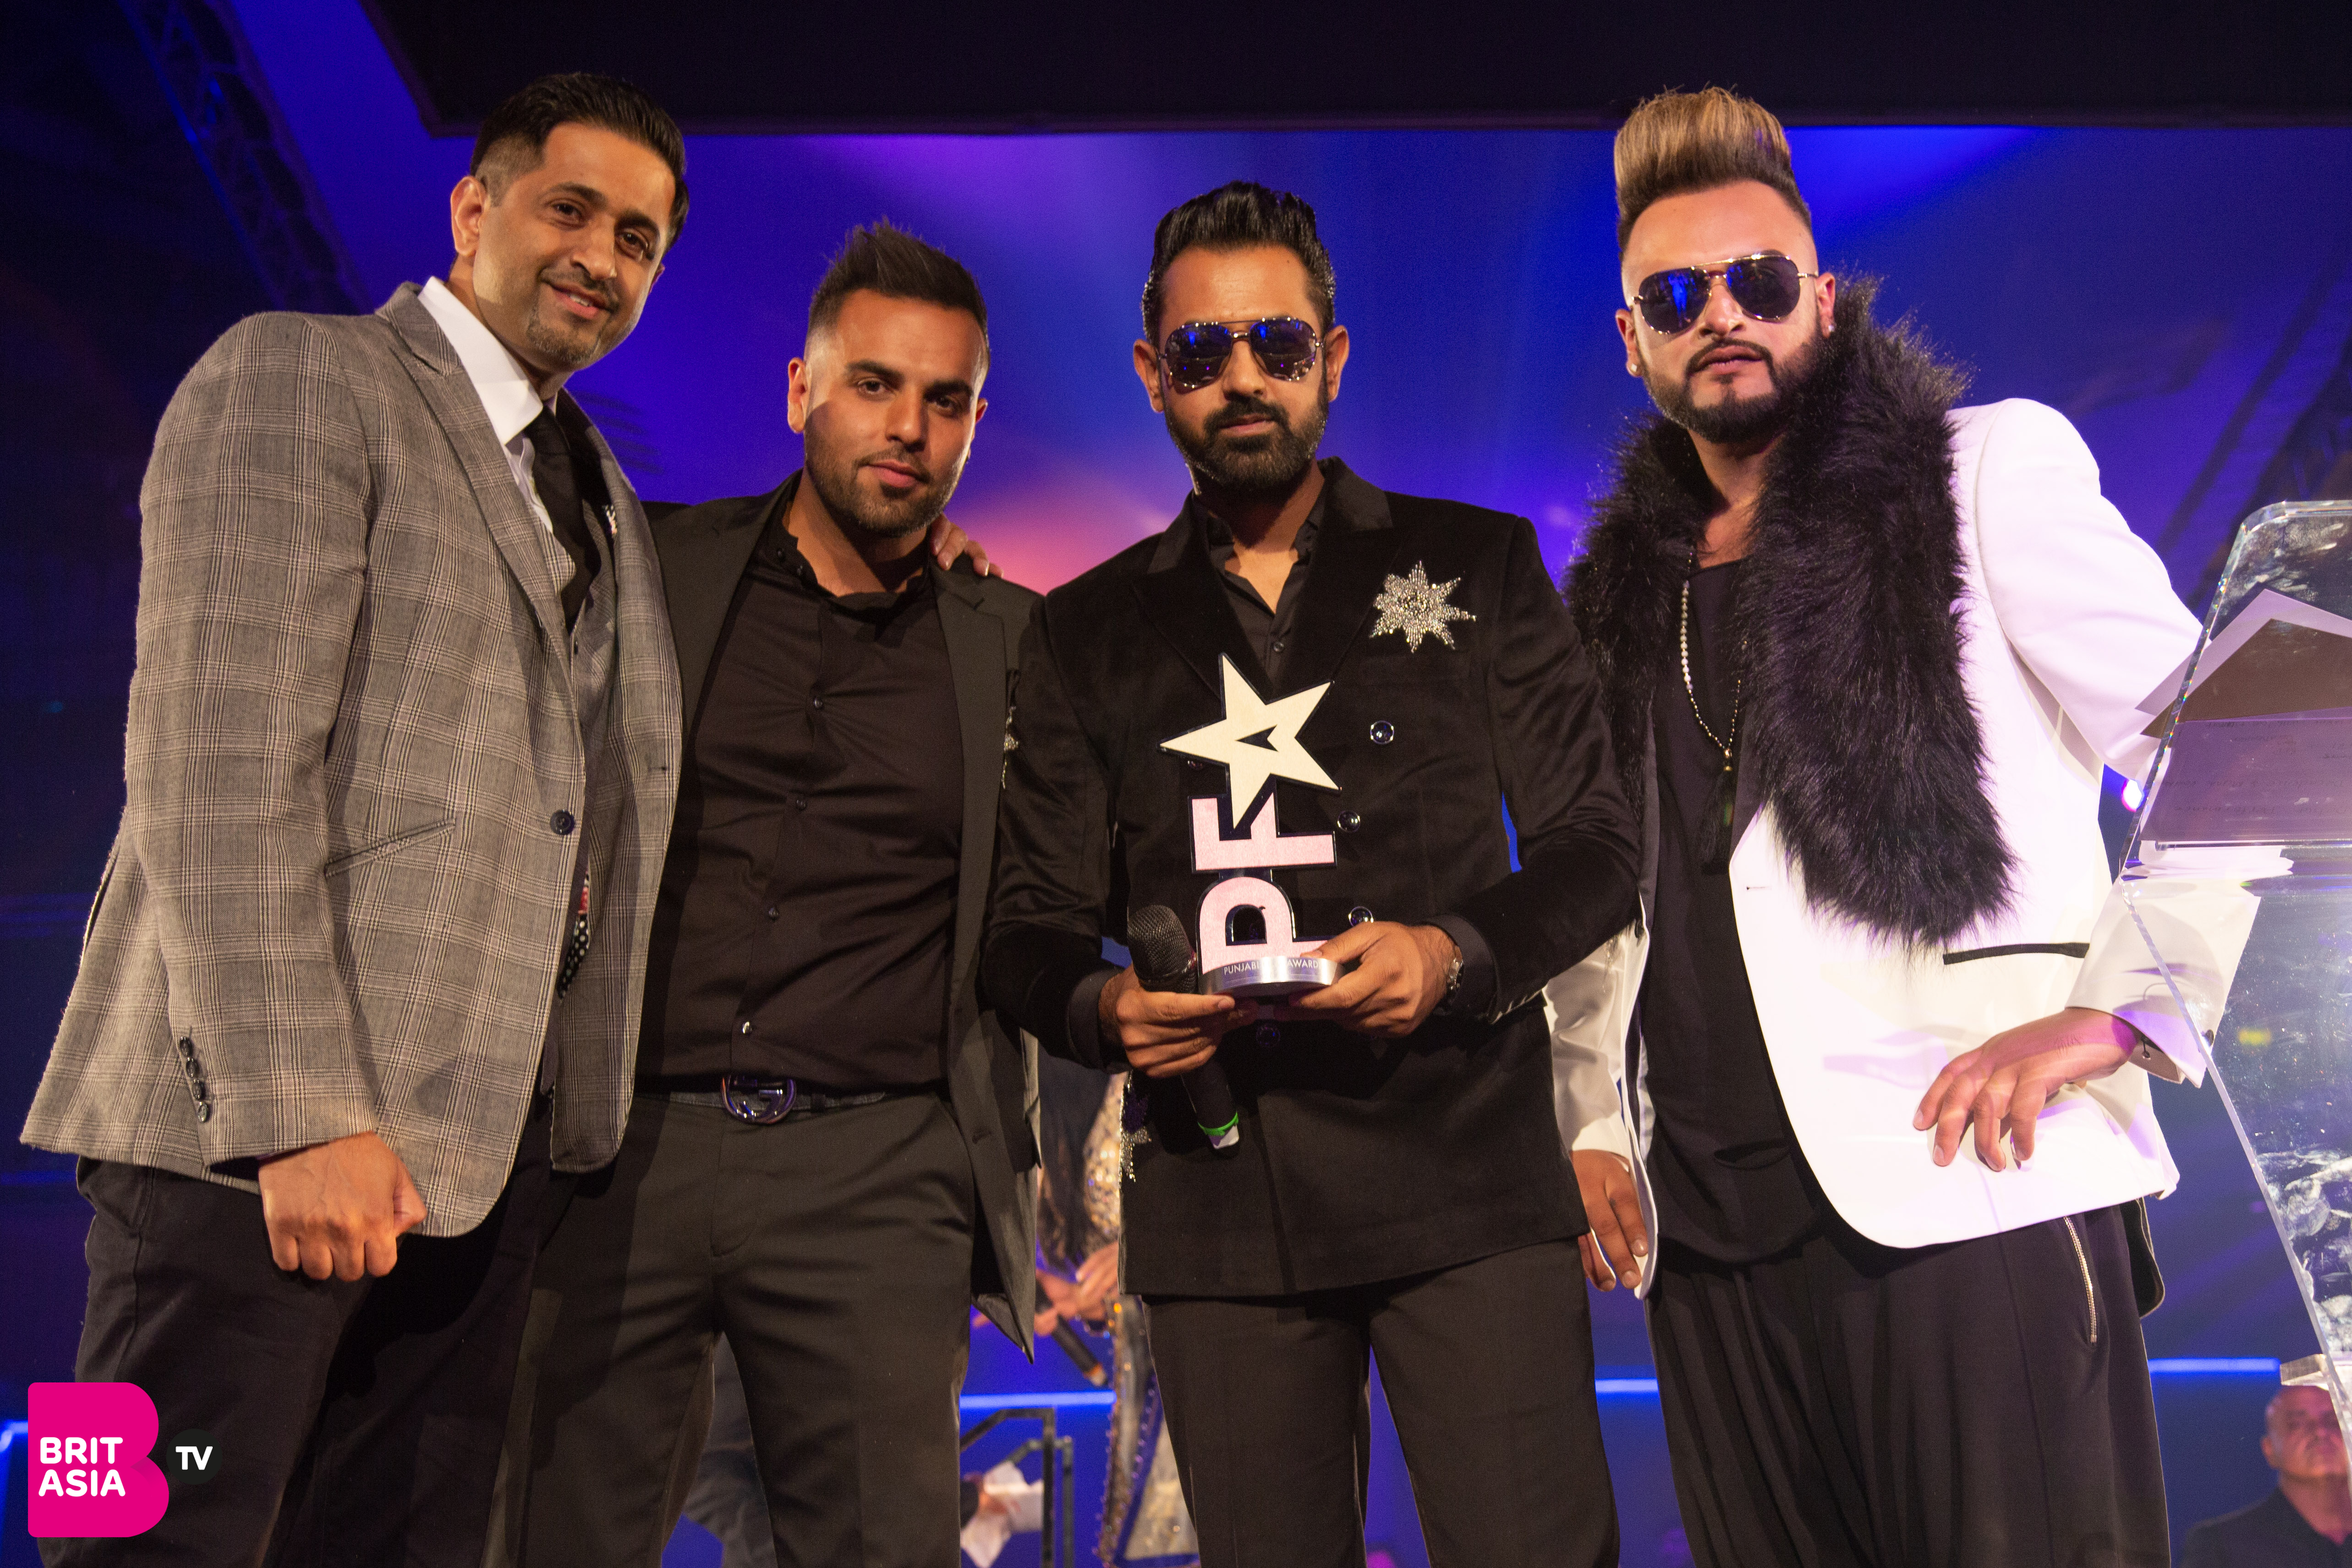 H Dhami, Gurj Sidhu and sponsor Snap Fitness 24/7 present the award for Best Film Song